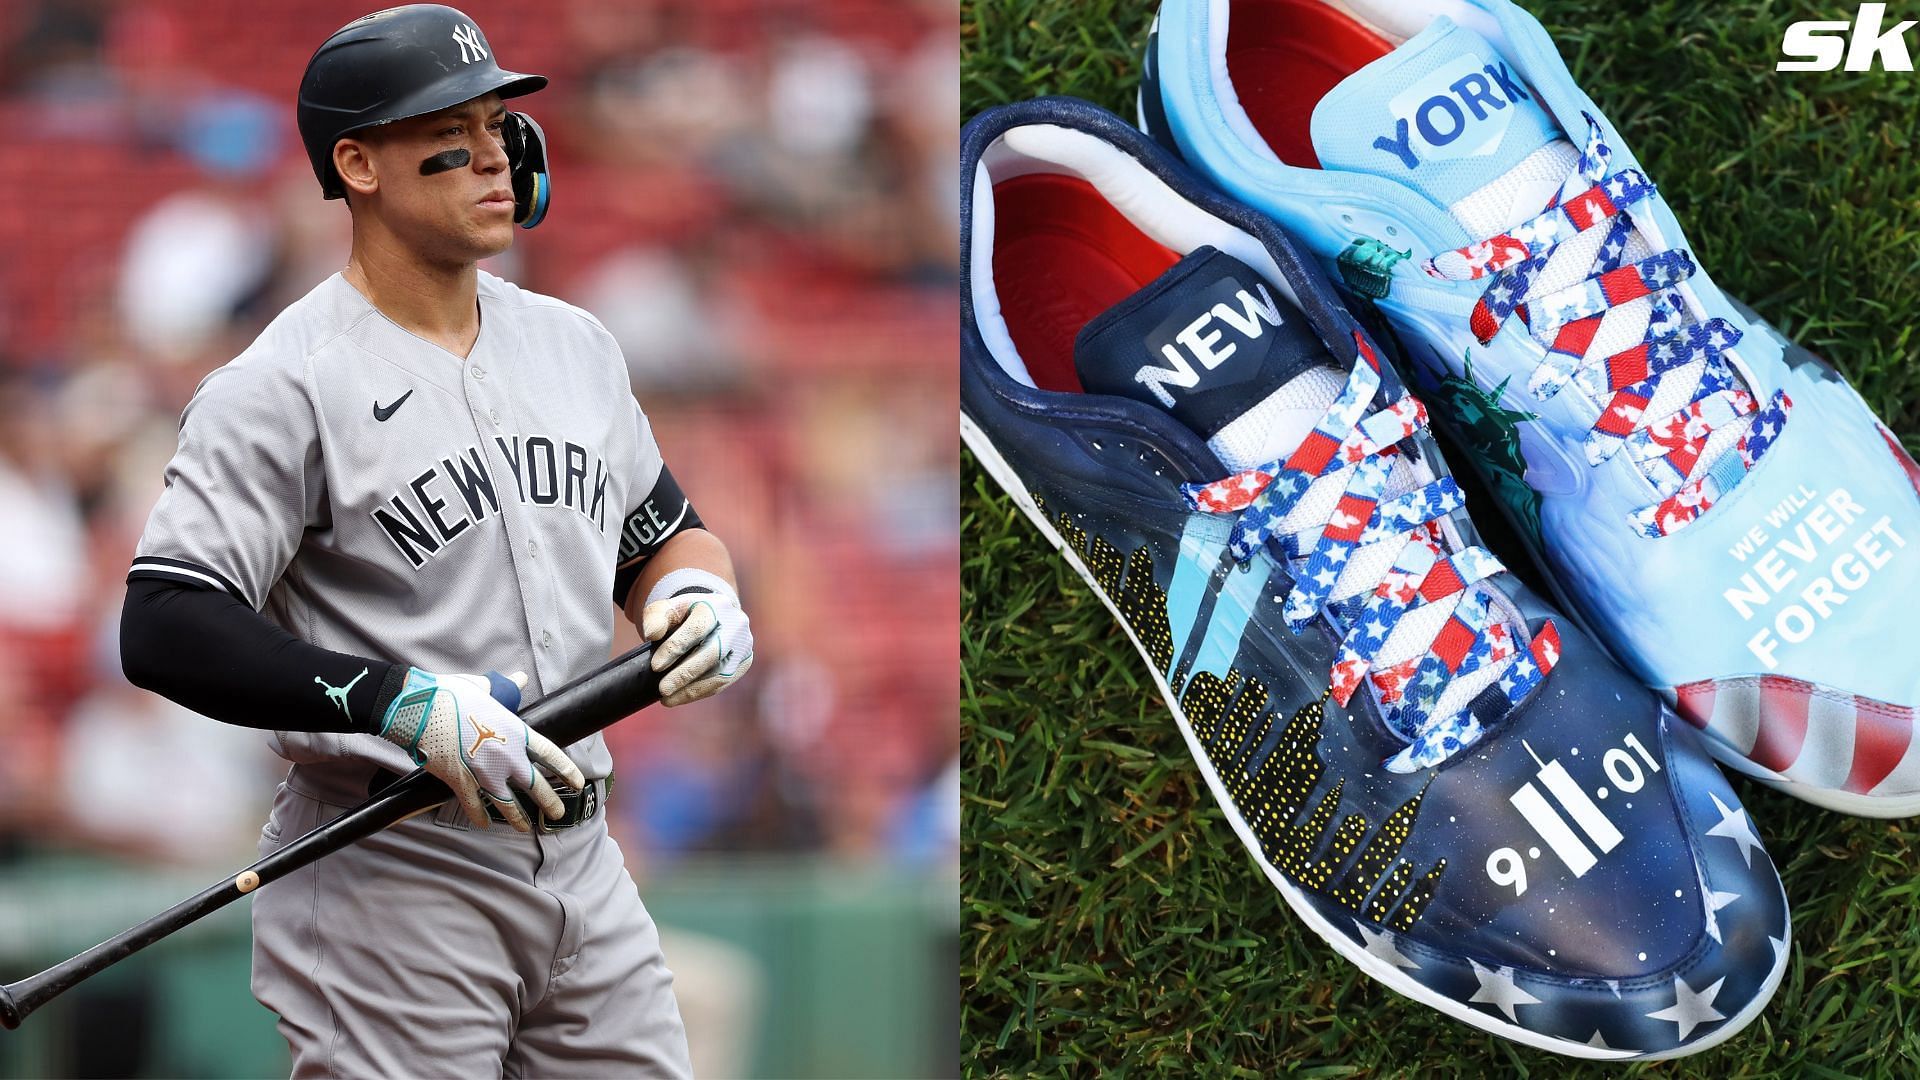 Yankees fan-favorite Aaron Judge steps up with classy custom-made cleats  for 9/11 tribute